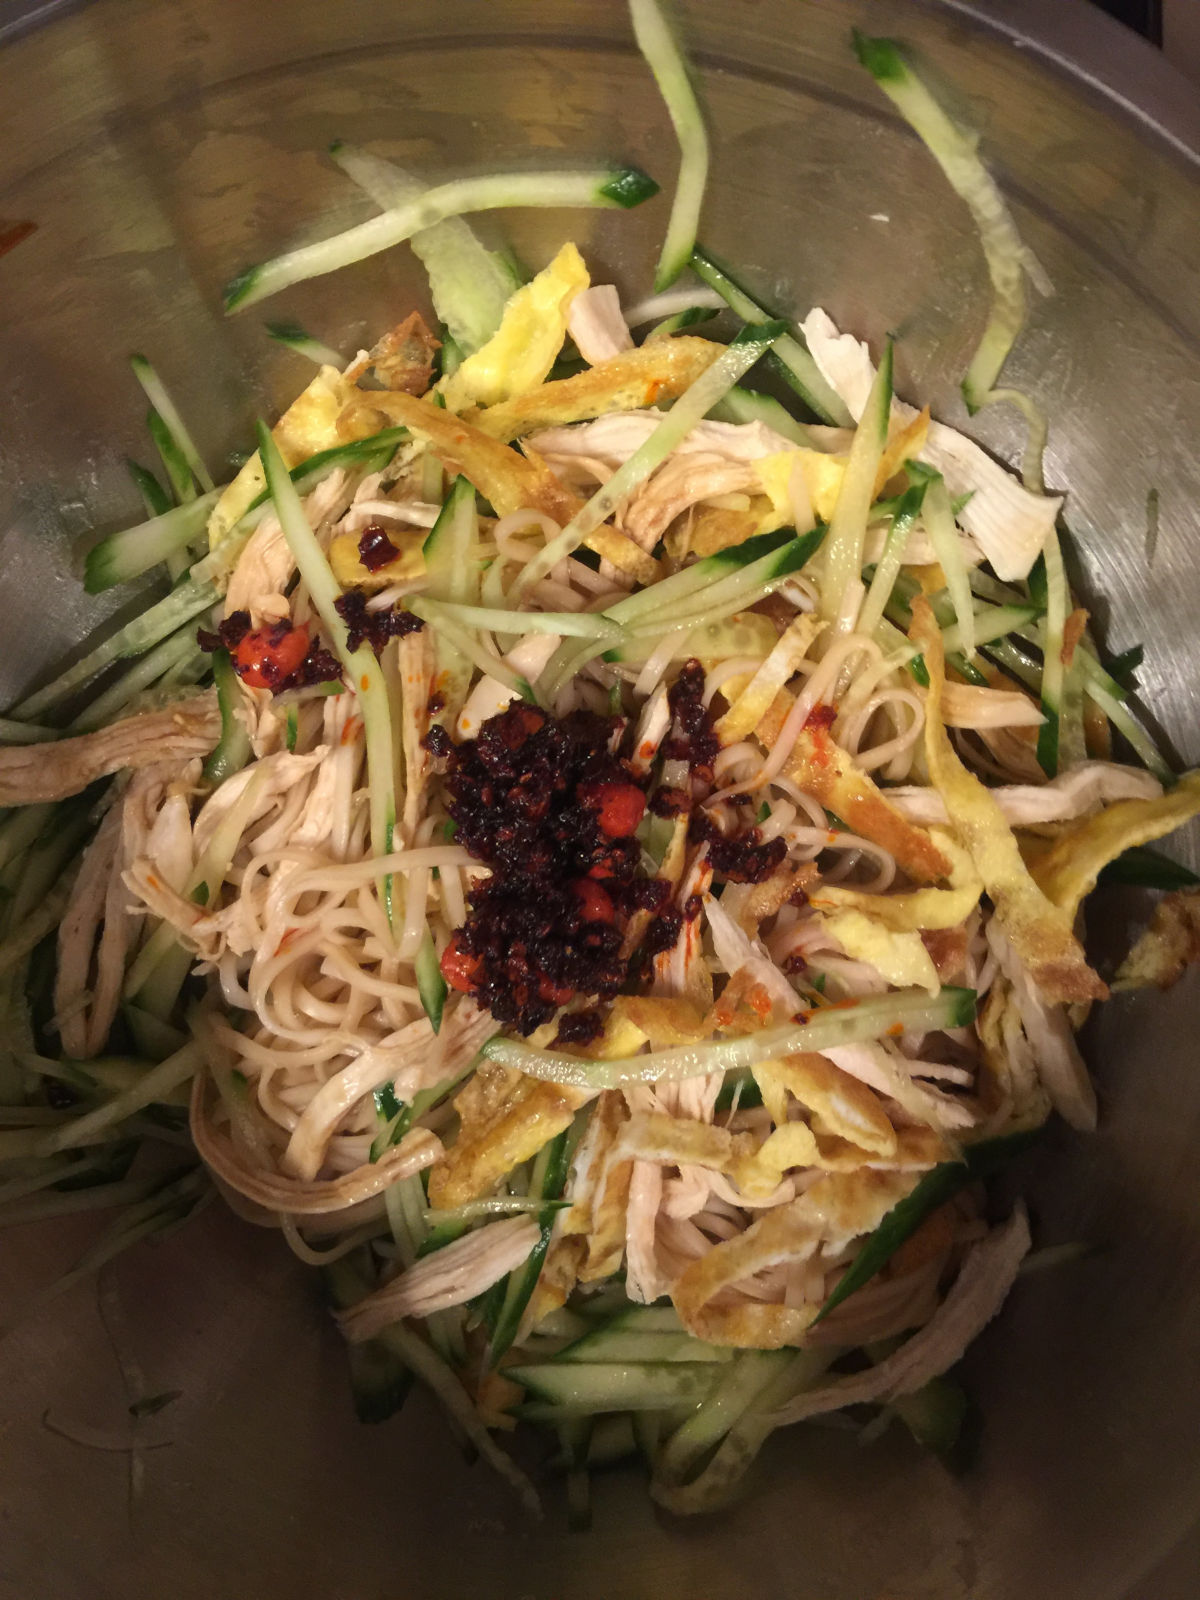 Close-up view of a large bowl with cucumber strips, shredded chicken breast, egg strips, cooked noodles and LaoGanMa chili sauce.